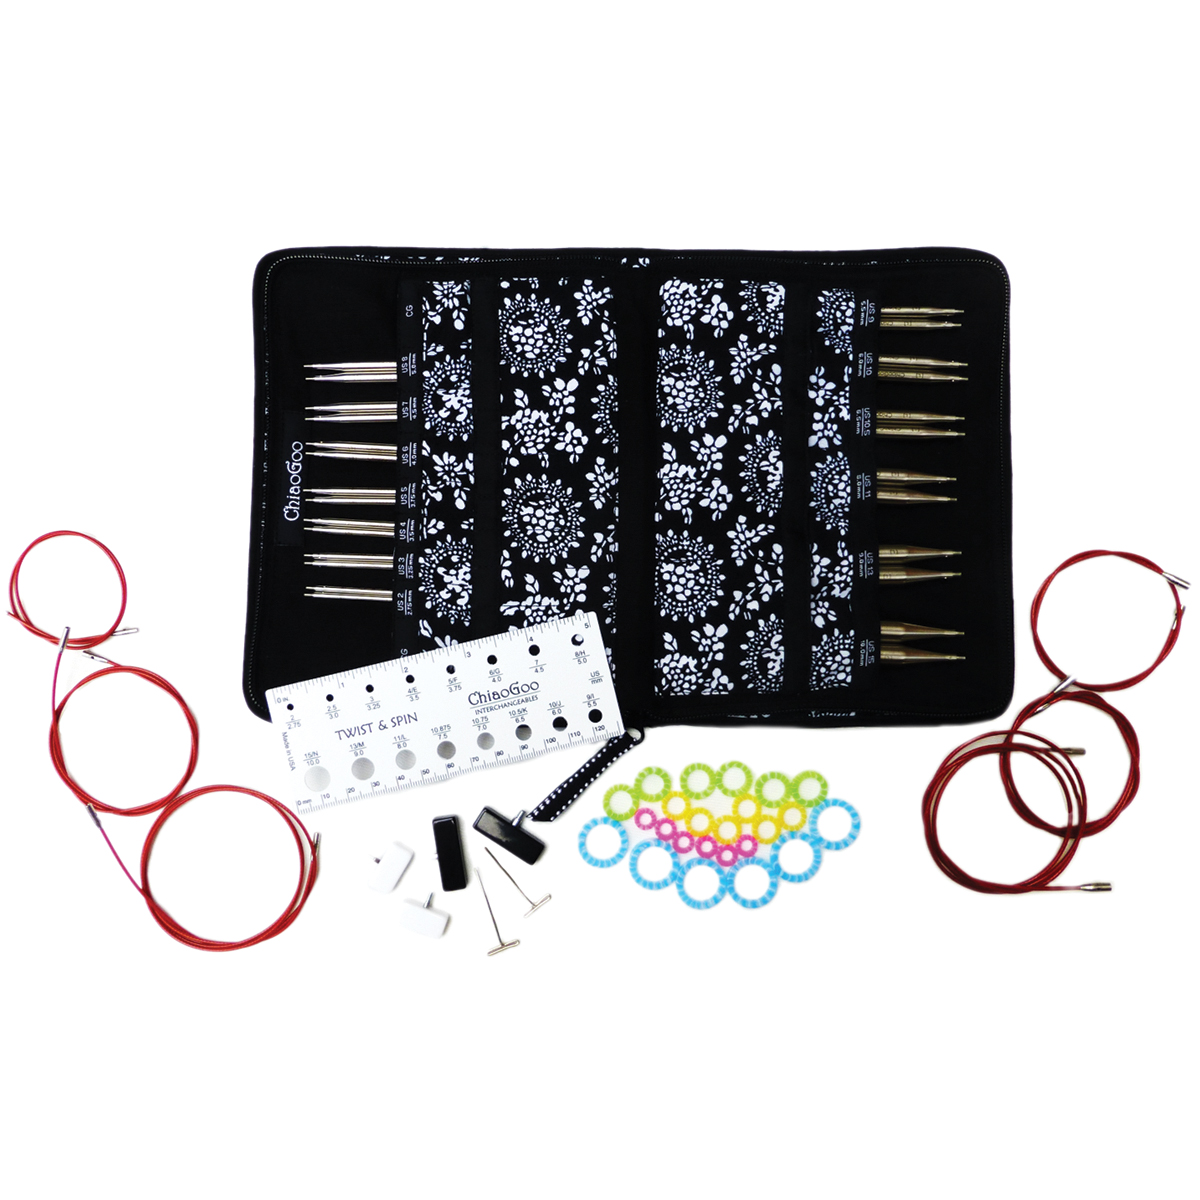 ChiaoGoo Twist Red Lace Interchangeable Knitting Needle 5 Tip Set-Complete 